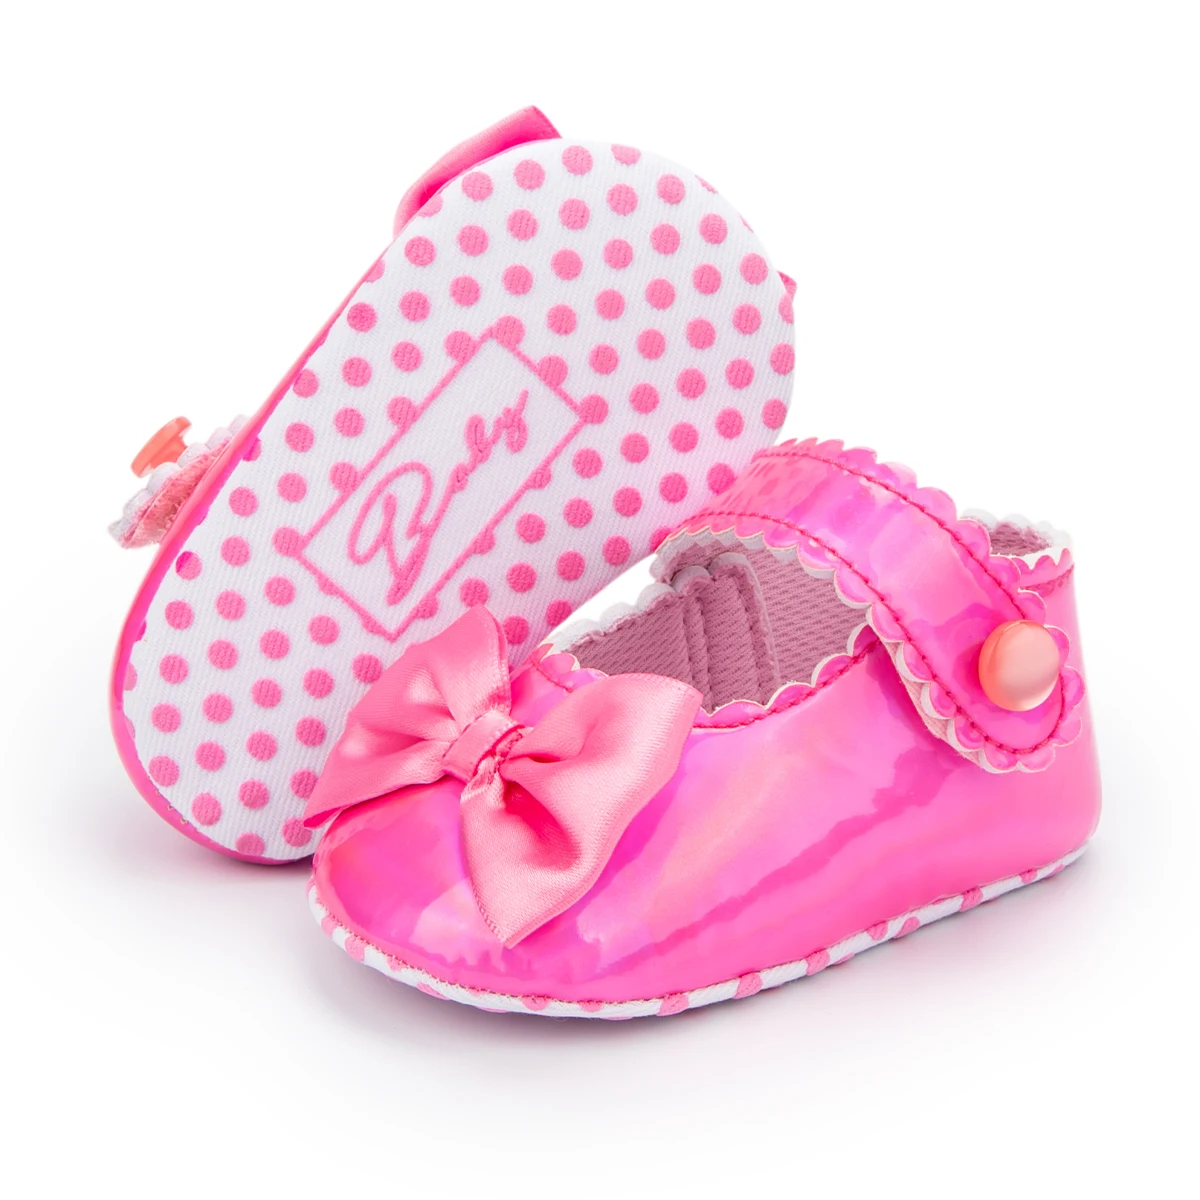 2023 Fashion Infant Footwear Wedding Party Mary Jane Bowknot New Design Princess Baby Girl Shoes